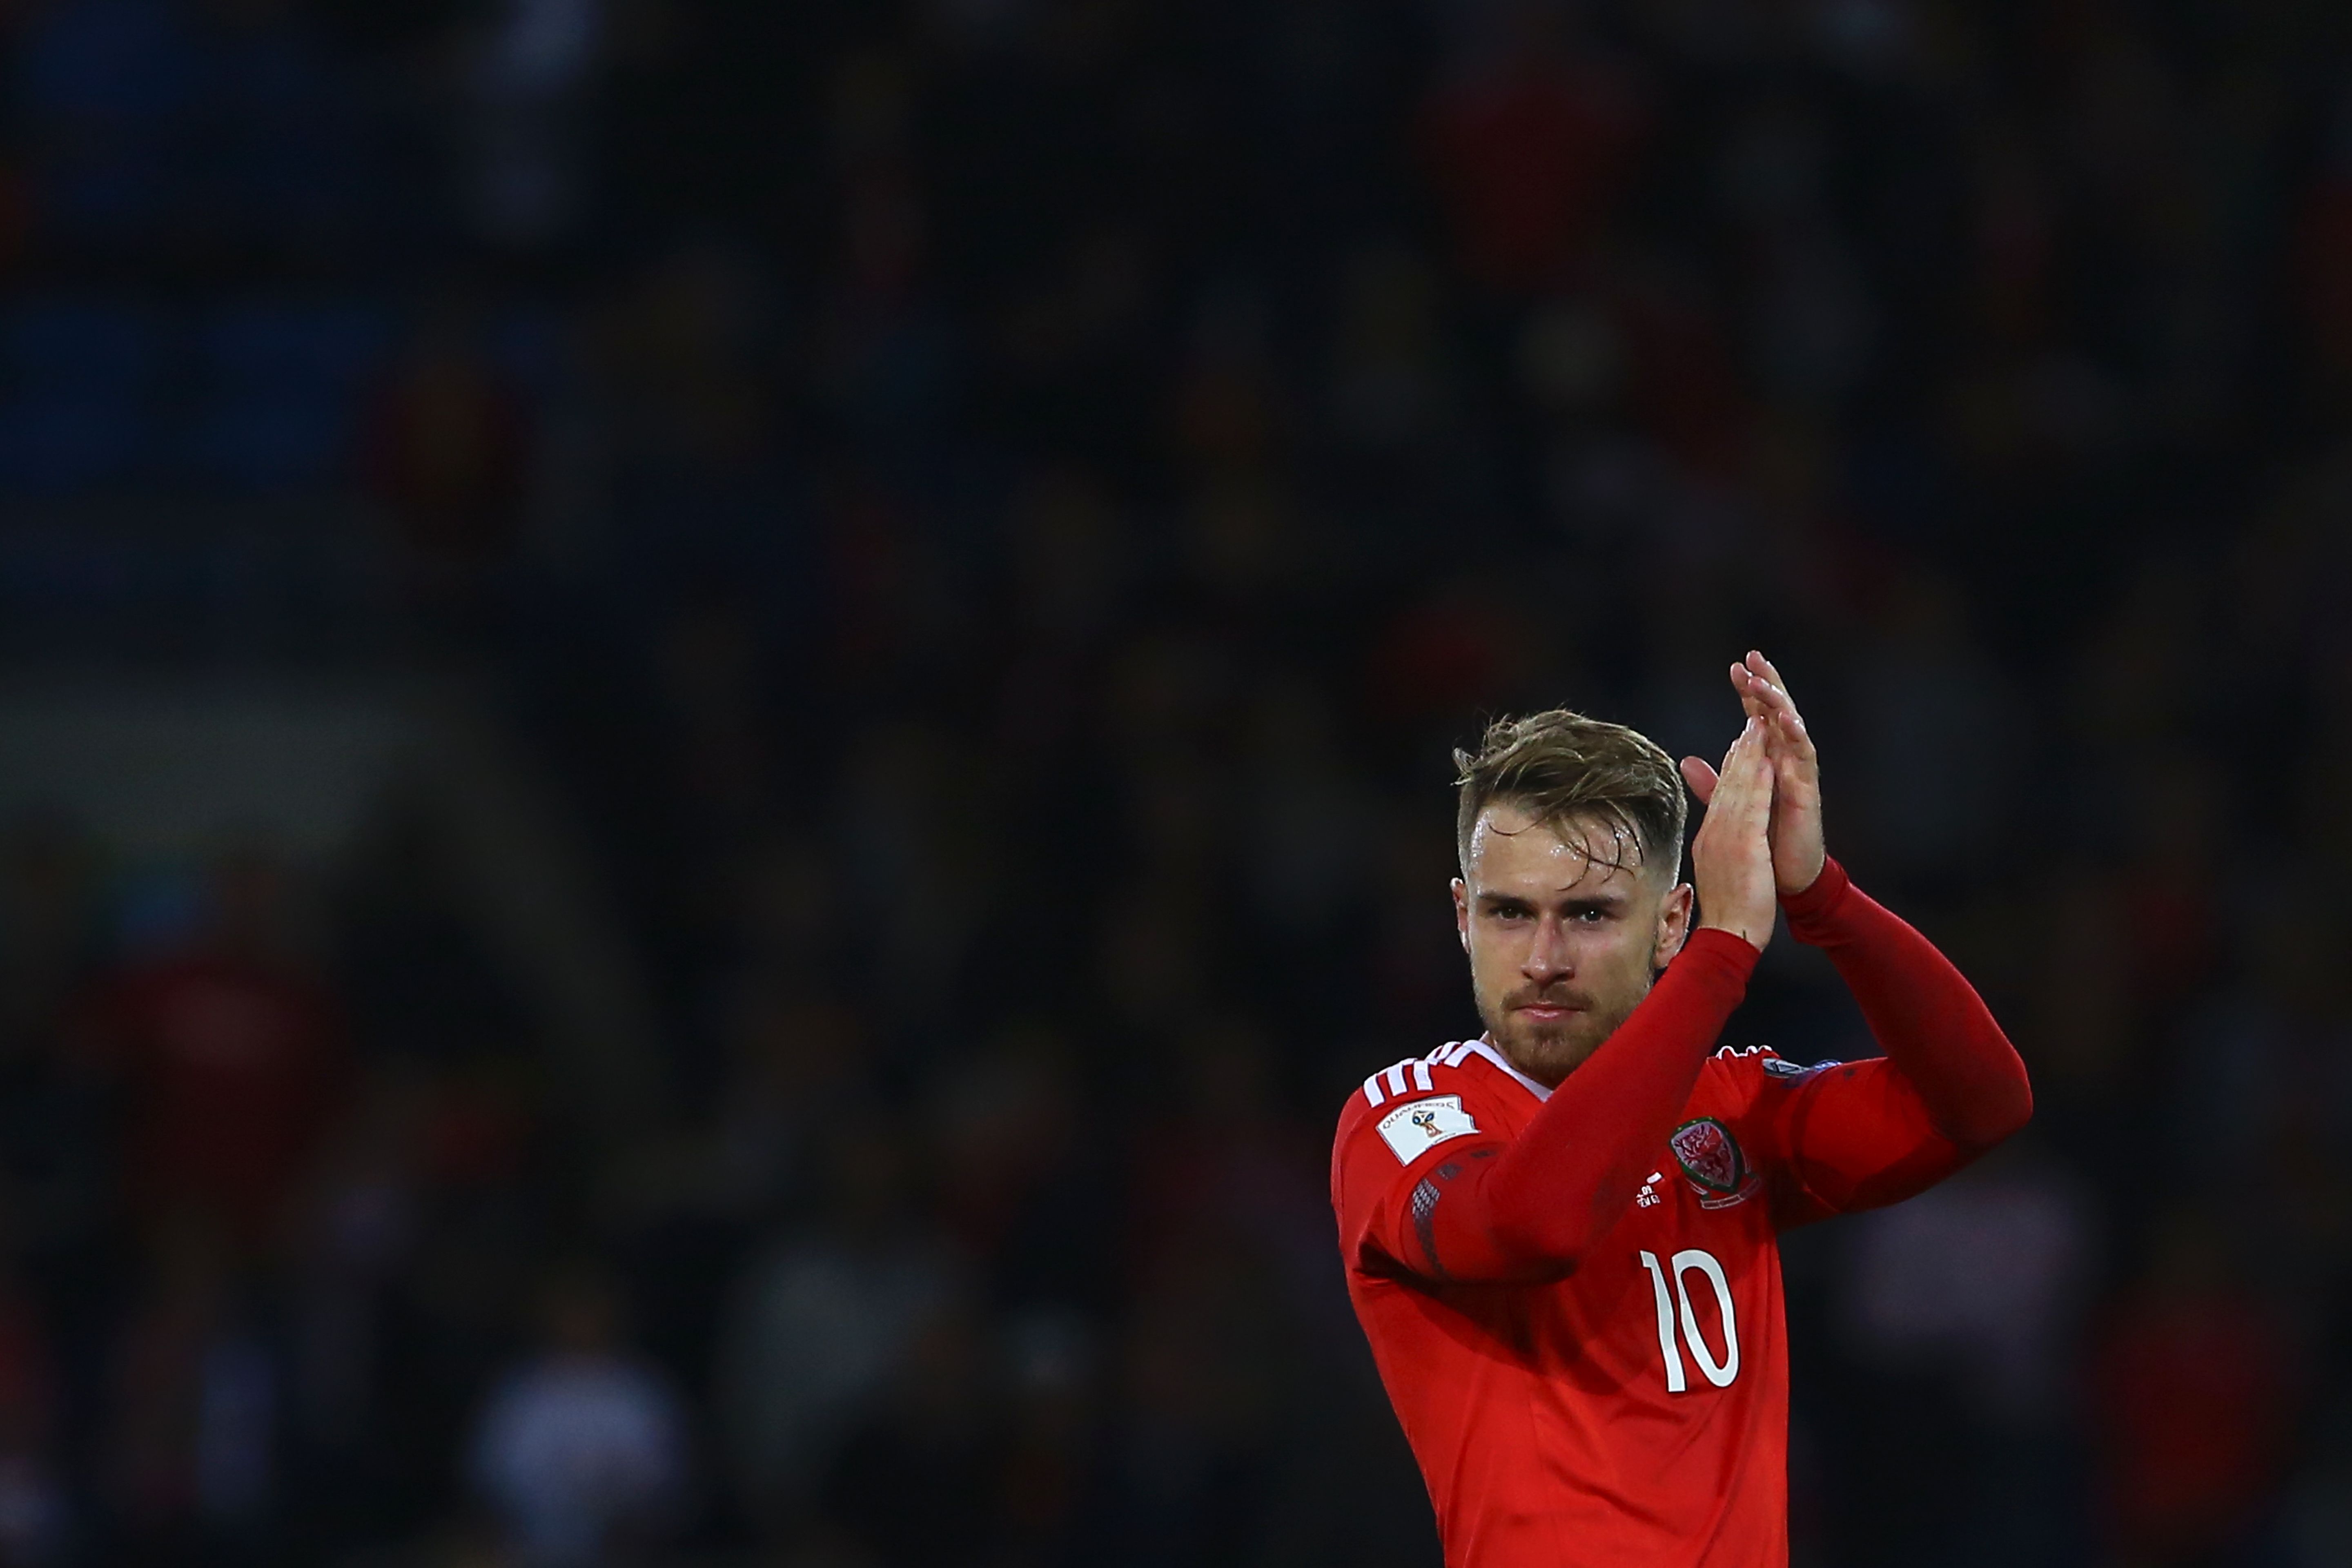 Wales' midfielder Aaron Ramsey applauds the fans at the final whistle of the FIFA World Cup 2018 qualification international football match between Wales and Austria in Cardiff, south Wales, on September 2, 2017. / AFP PHOTO / Geoff CADDICK        (Photo credit should read GEOFF CADDICK/AFP/Getty Images)